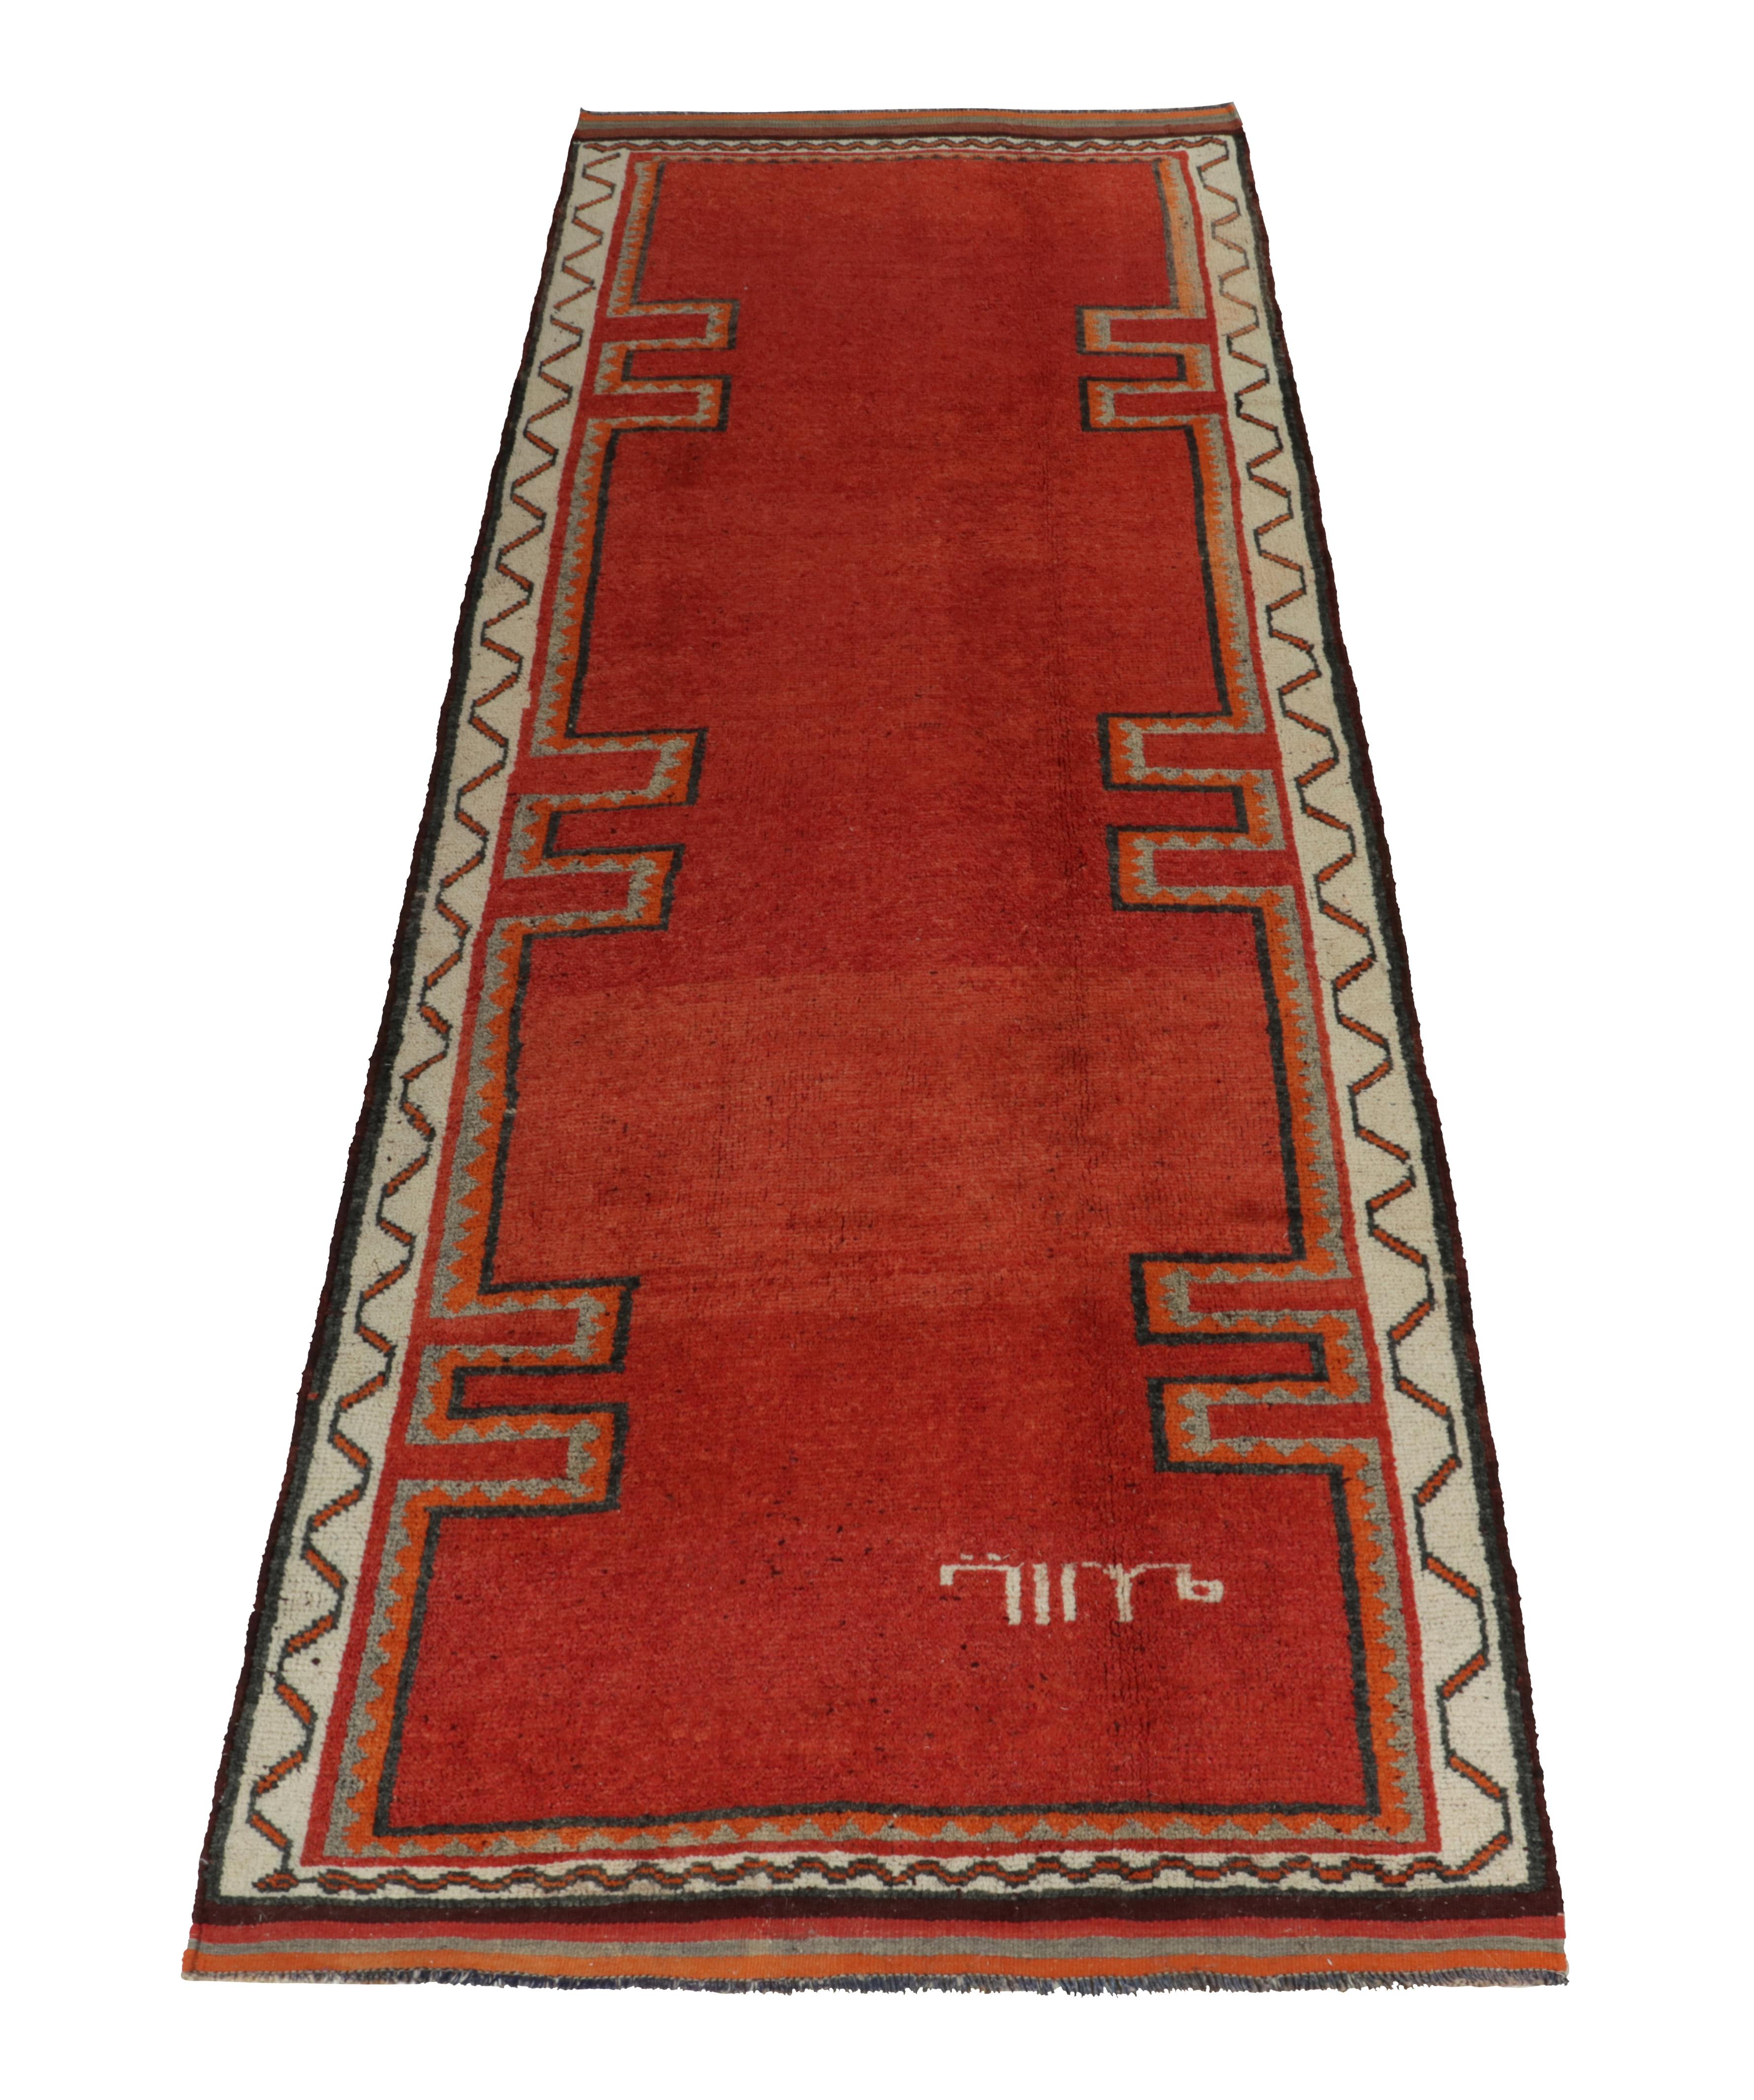 Hand-knotted in wool, a 4x12 rug from Rug & Kilim’s latest prominent curation of rare tribal pieces. 

Originating from Turkey circa 1950-1960, the piece enjoys a seldom-seen open field in this design with rich tones of red, complemented